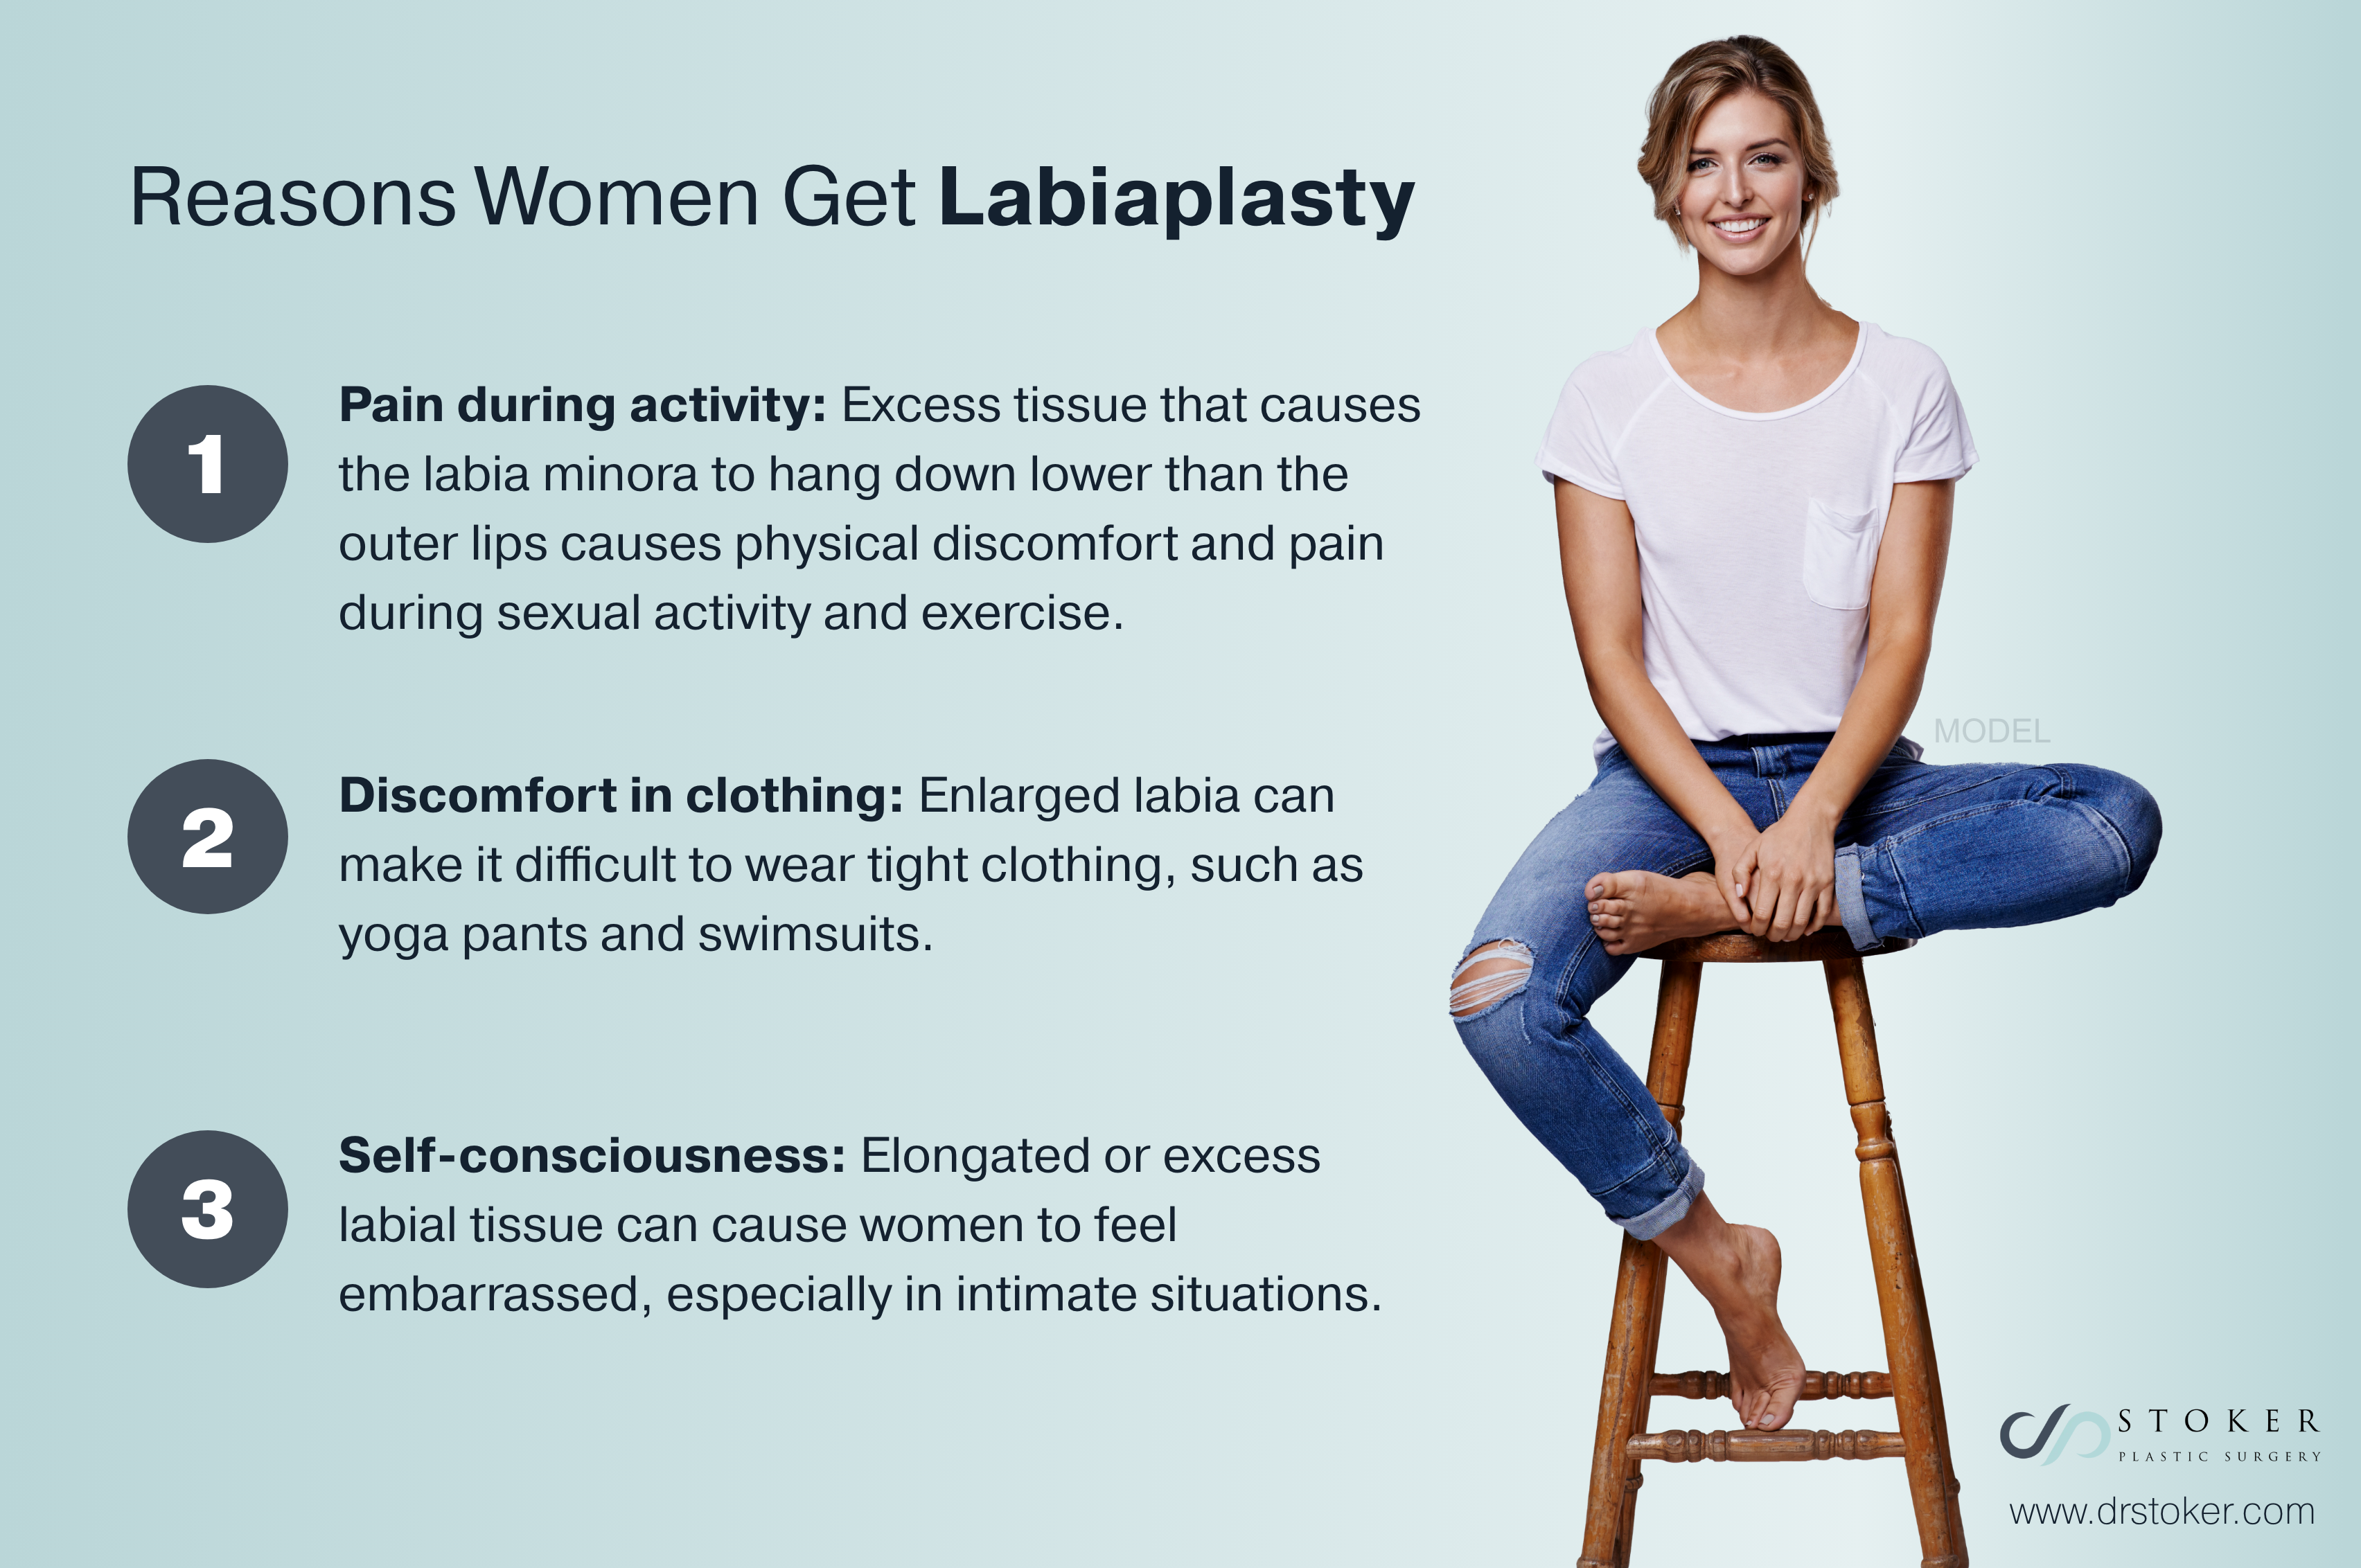 Is Labiaplasty Right for You? Here are some reasons women choose to get labiaplasty.